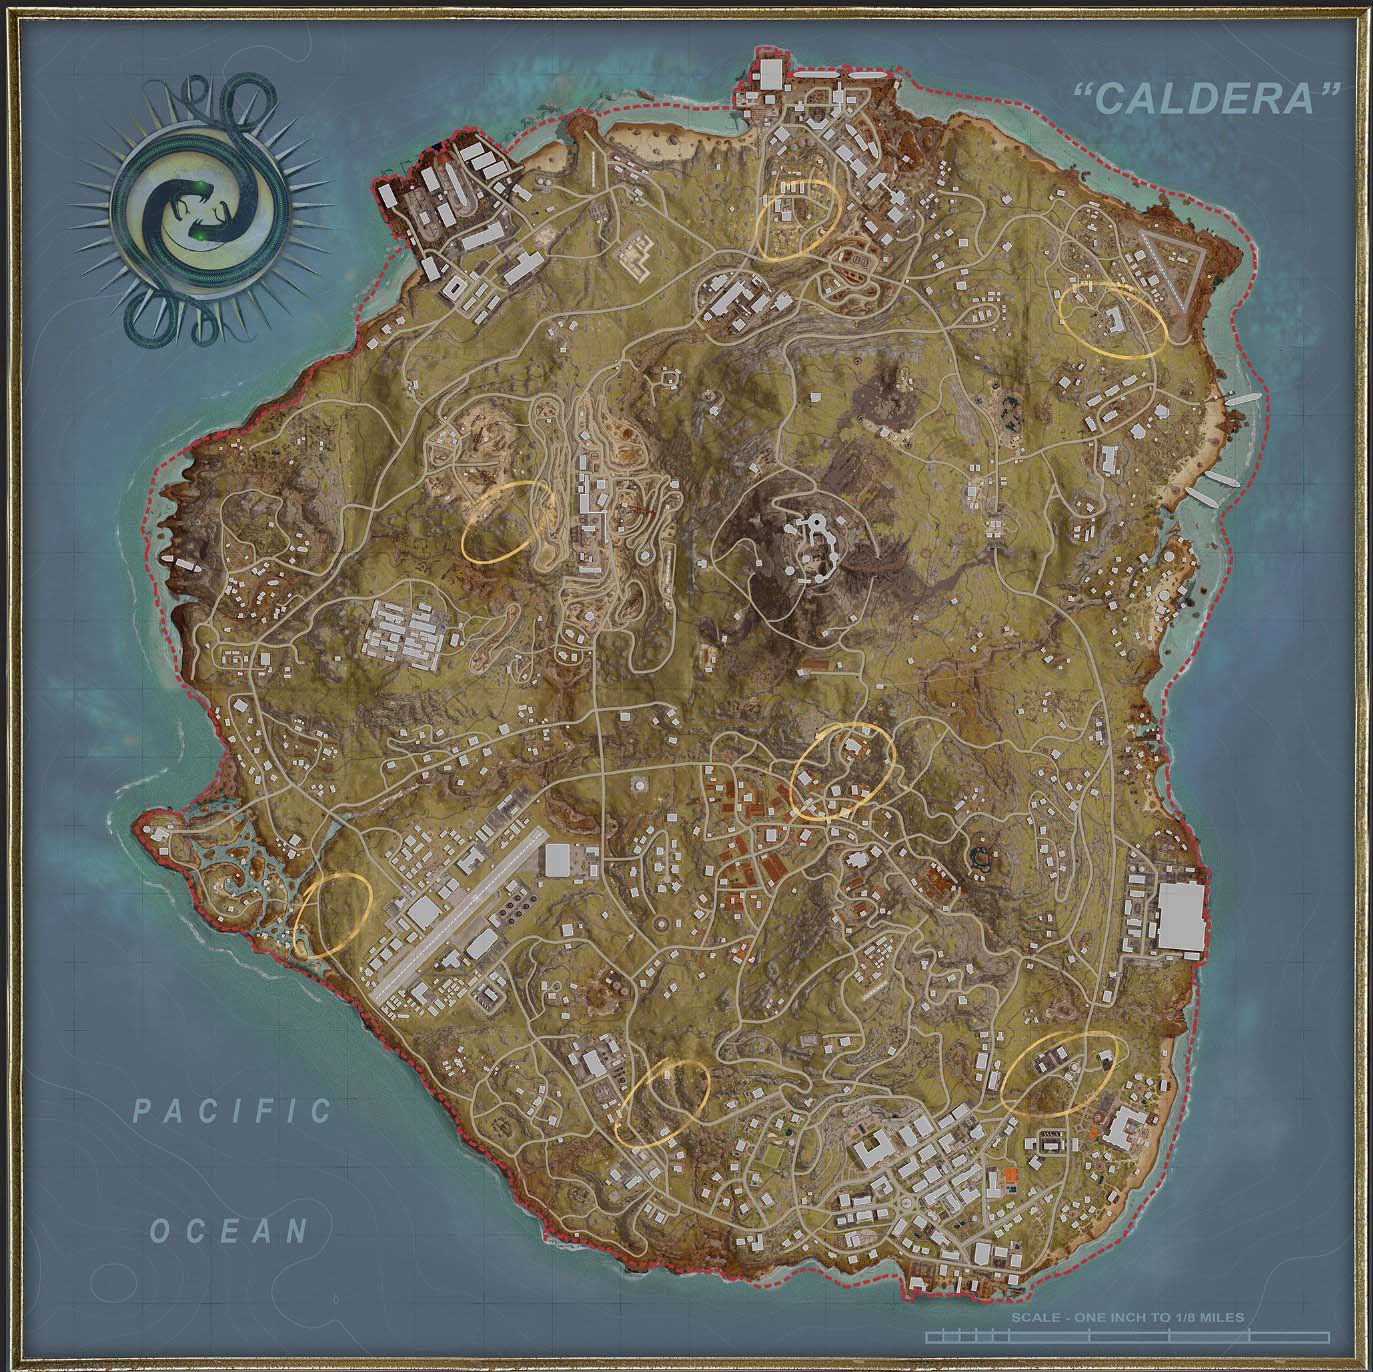 (The yellow circles mark the locations of the bunkers on Caldera. The symbol at the top left is also important.)